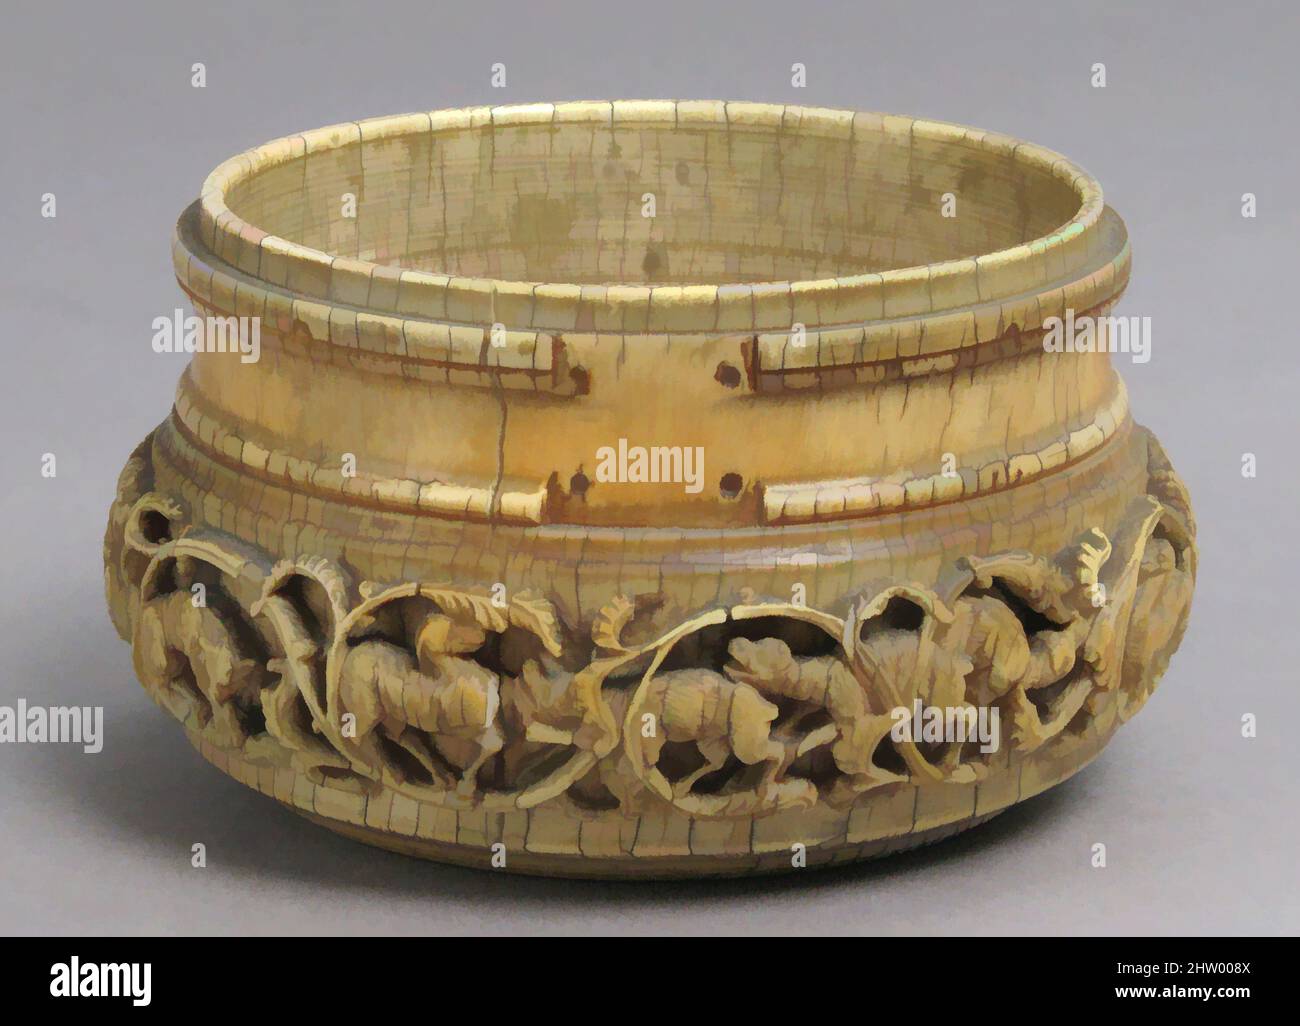 Art inspired by Pyx, 16th century or earlier, Italian, Ivory, Overall: 2 5/8 x 4 3/4 in. (6.7 x 12.1 cm), Ivories, Classic works modernized by Artotop with a splash of modernity. Shapes, color and value, eye-catching visual impact on art. Emotions through freedom of artworks in a contemporary way. A timeless message pursuing a wildly creative new direction. Artists turning to the digital medium and creating the Artotop NFT Stock Photo